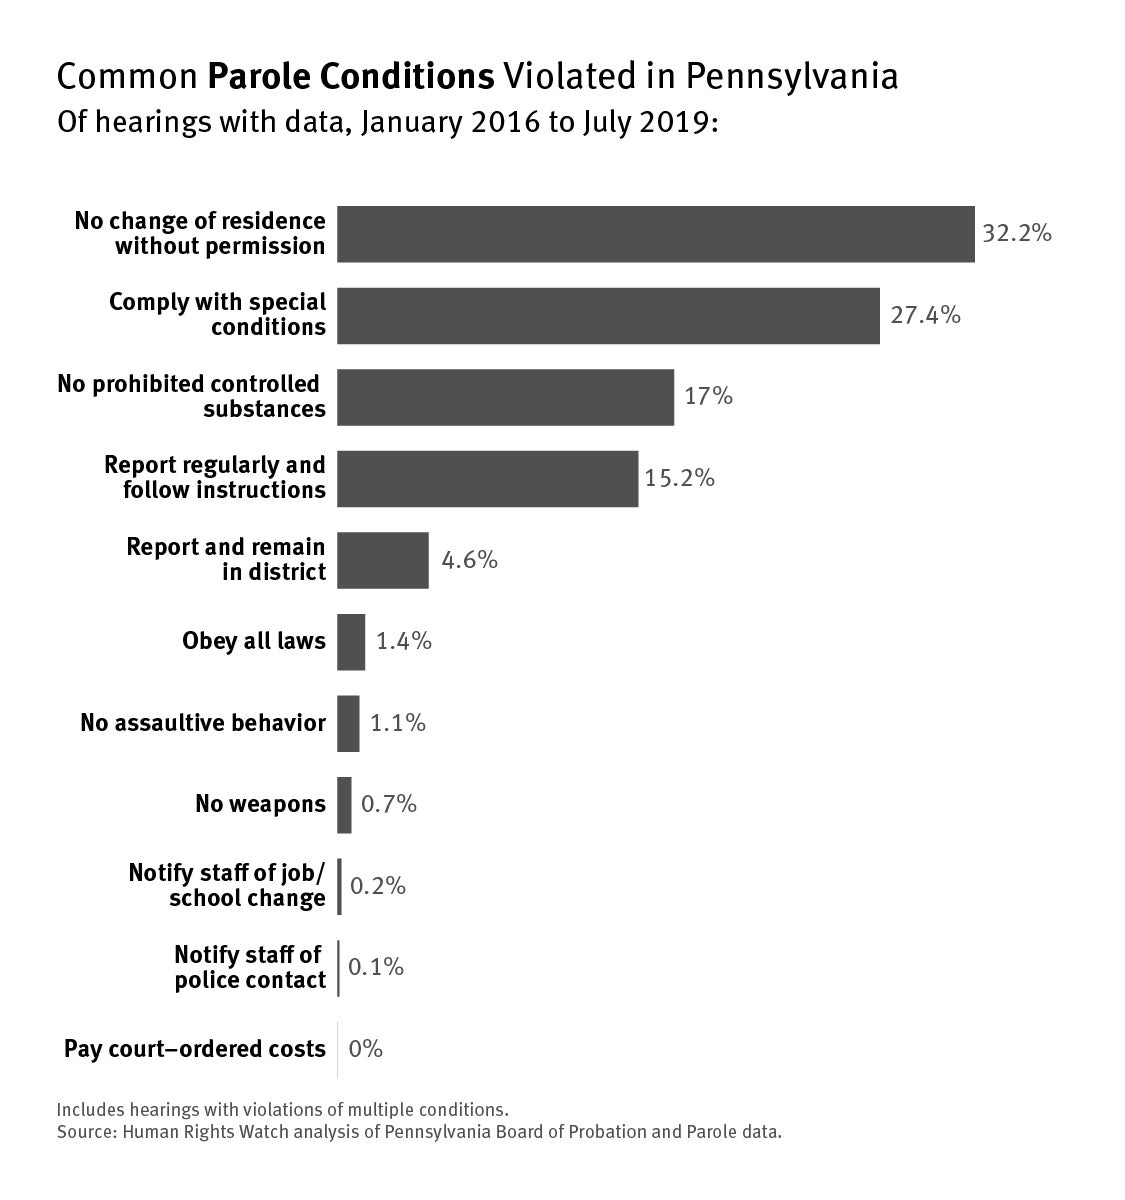 A bar graph that details common violations of parole conditions in the state of Pennsylvania